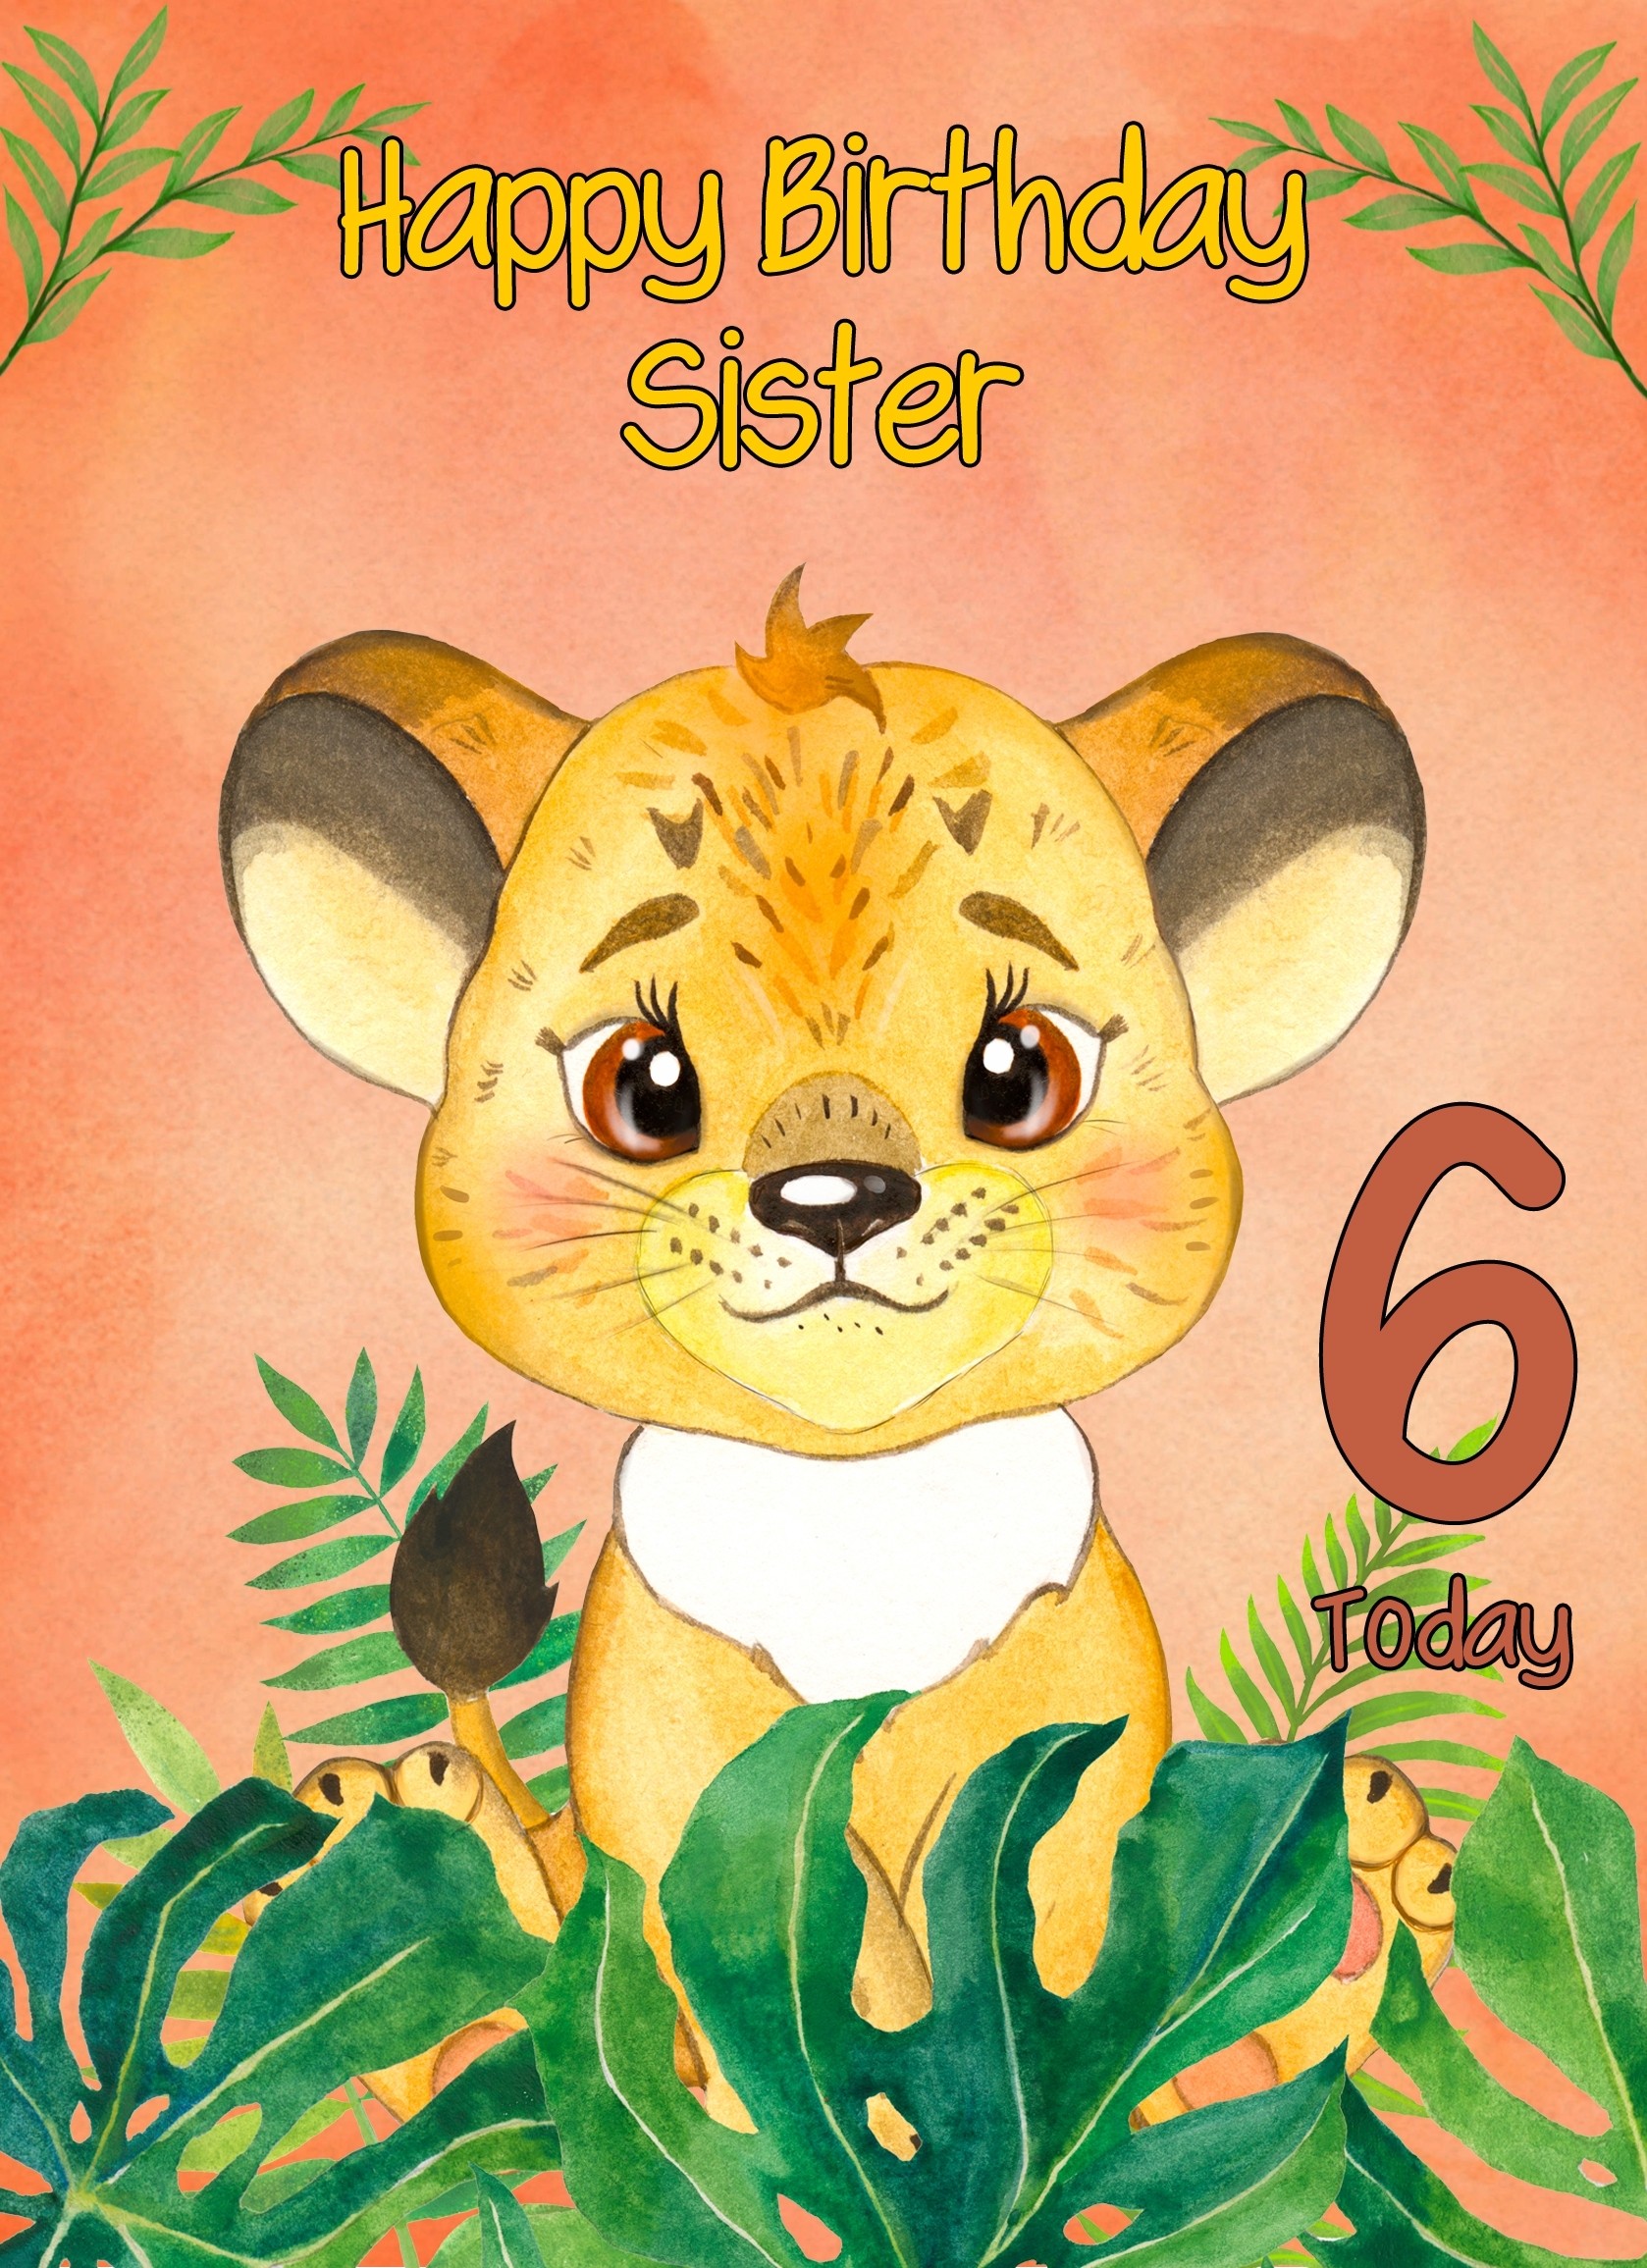 6th Birthday Card for Sister (Lion)